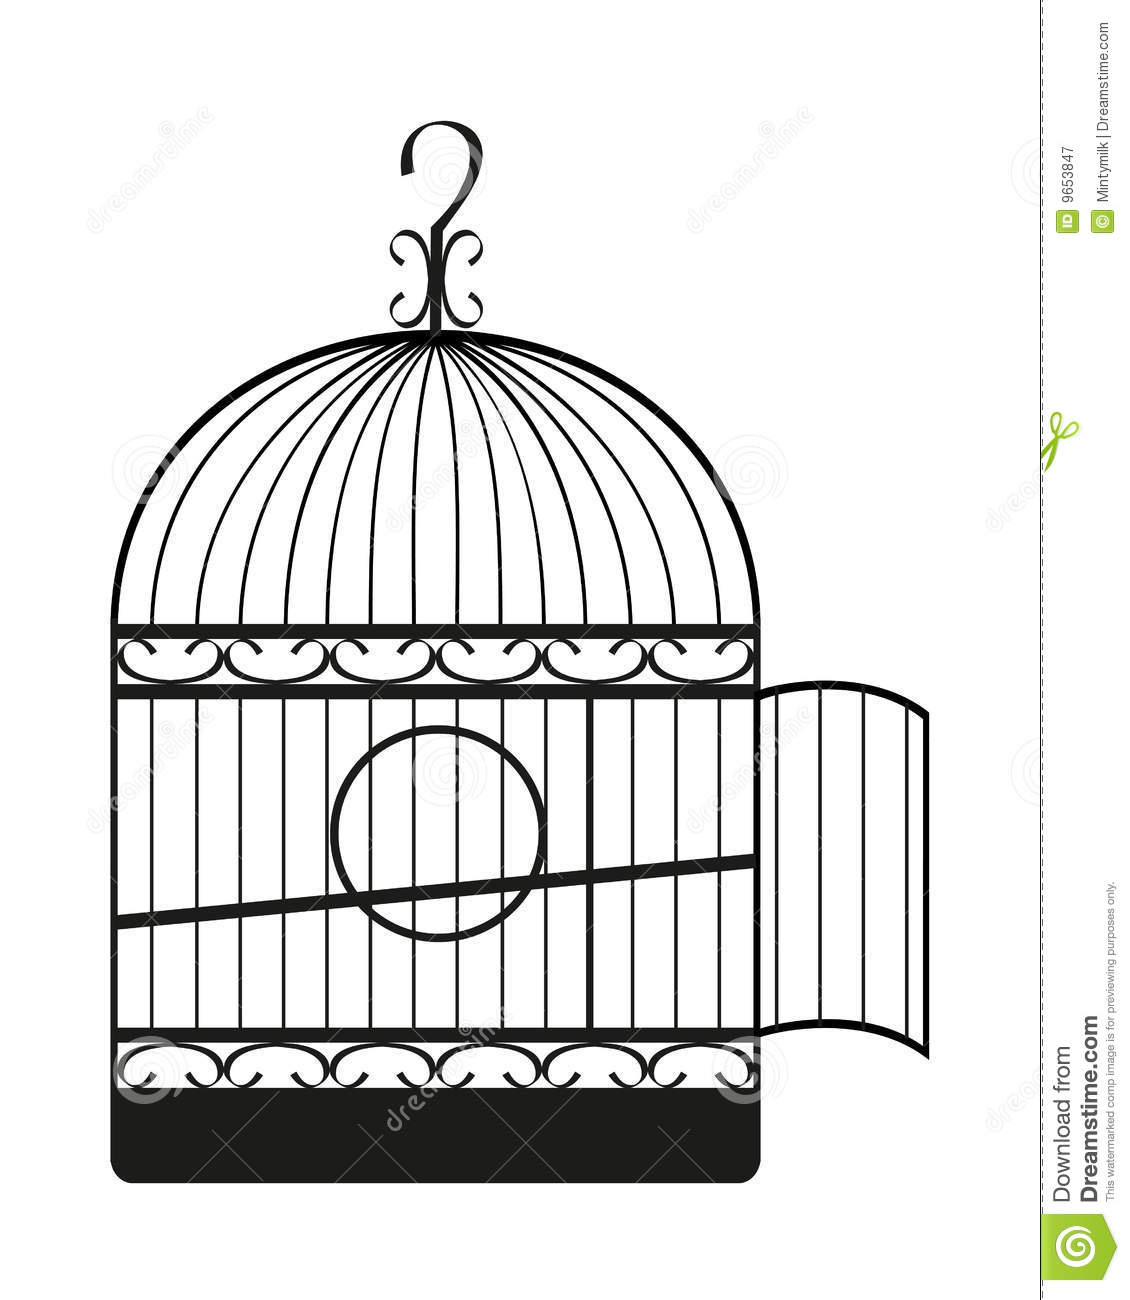 Bird Cage Royalty Free Stock Photography   Image  9653847